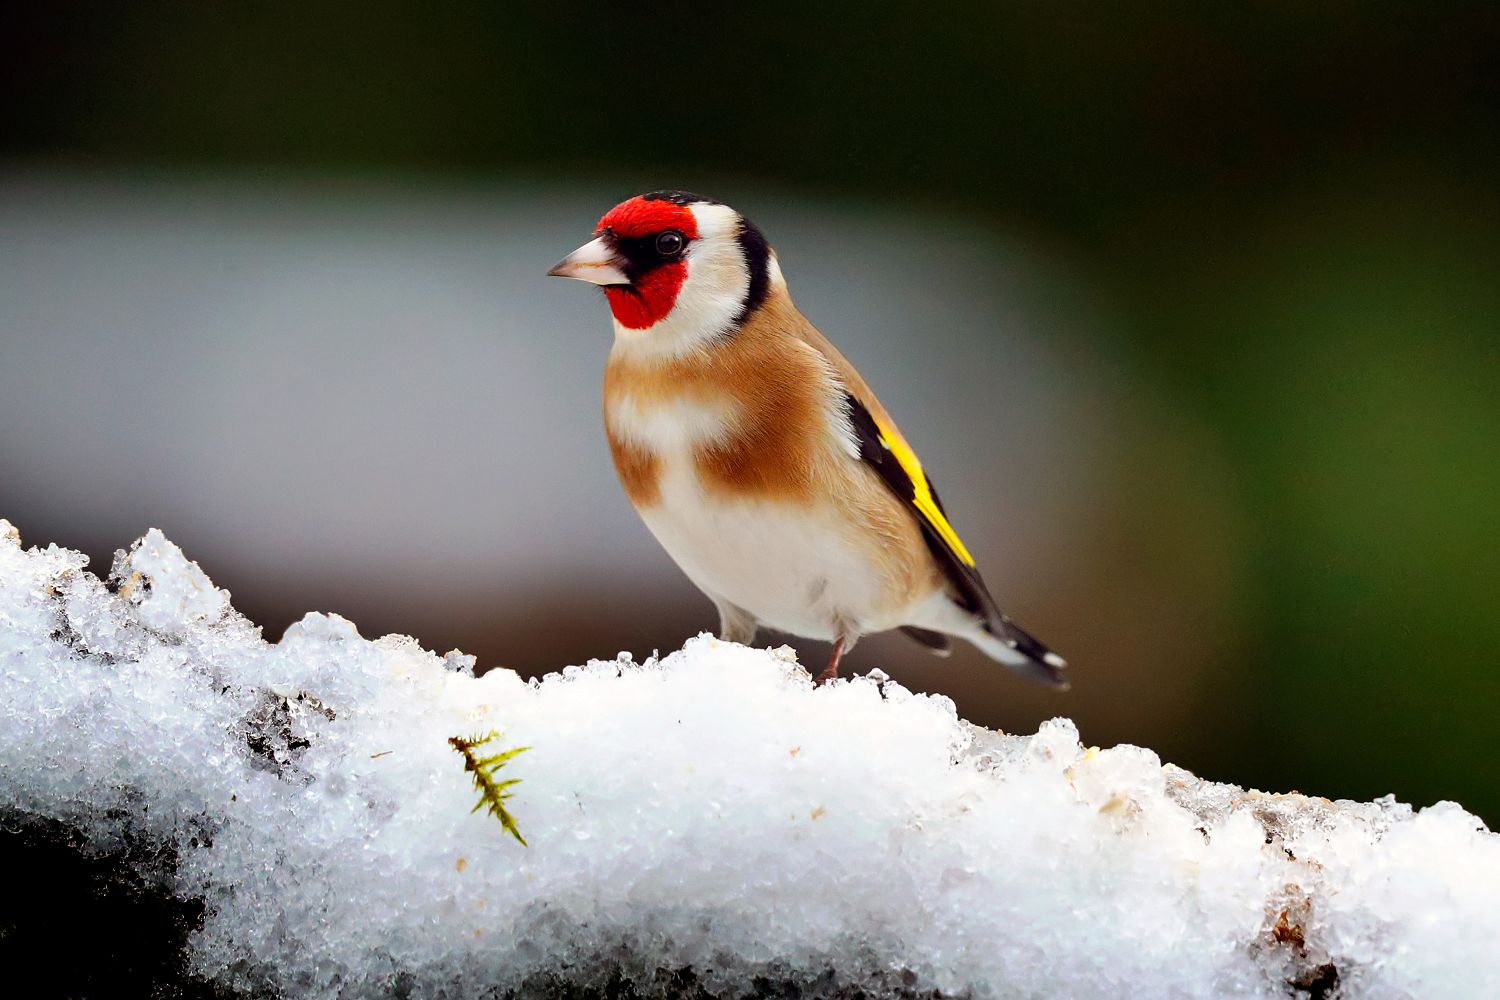 Goldfinch in winter snow by Wildlife photographer Martin Lawrence